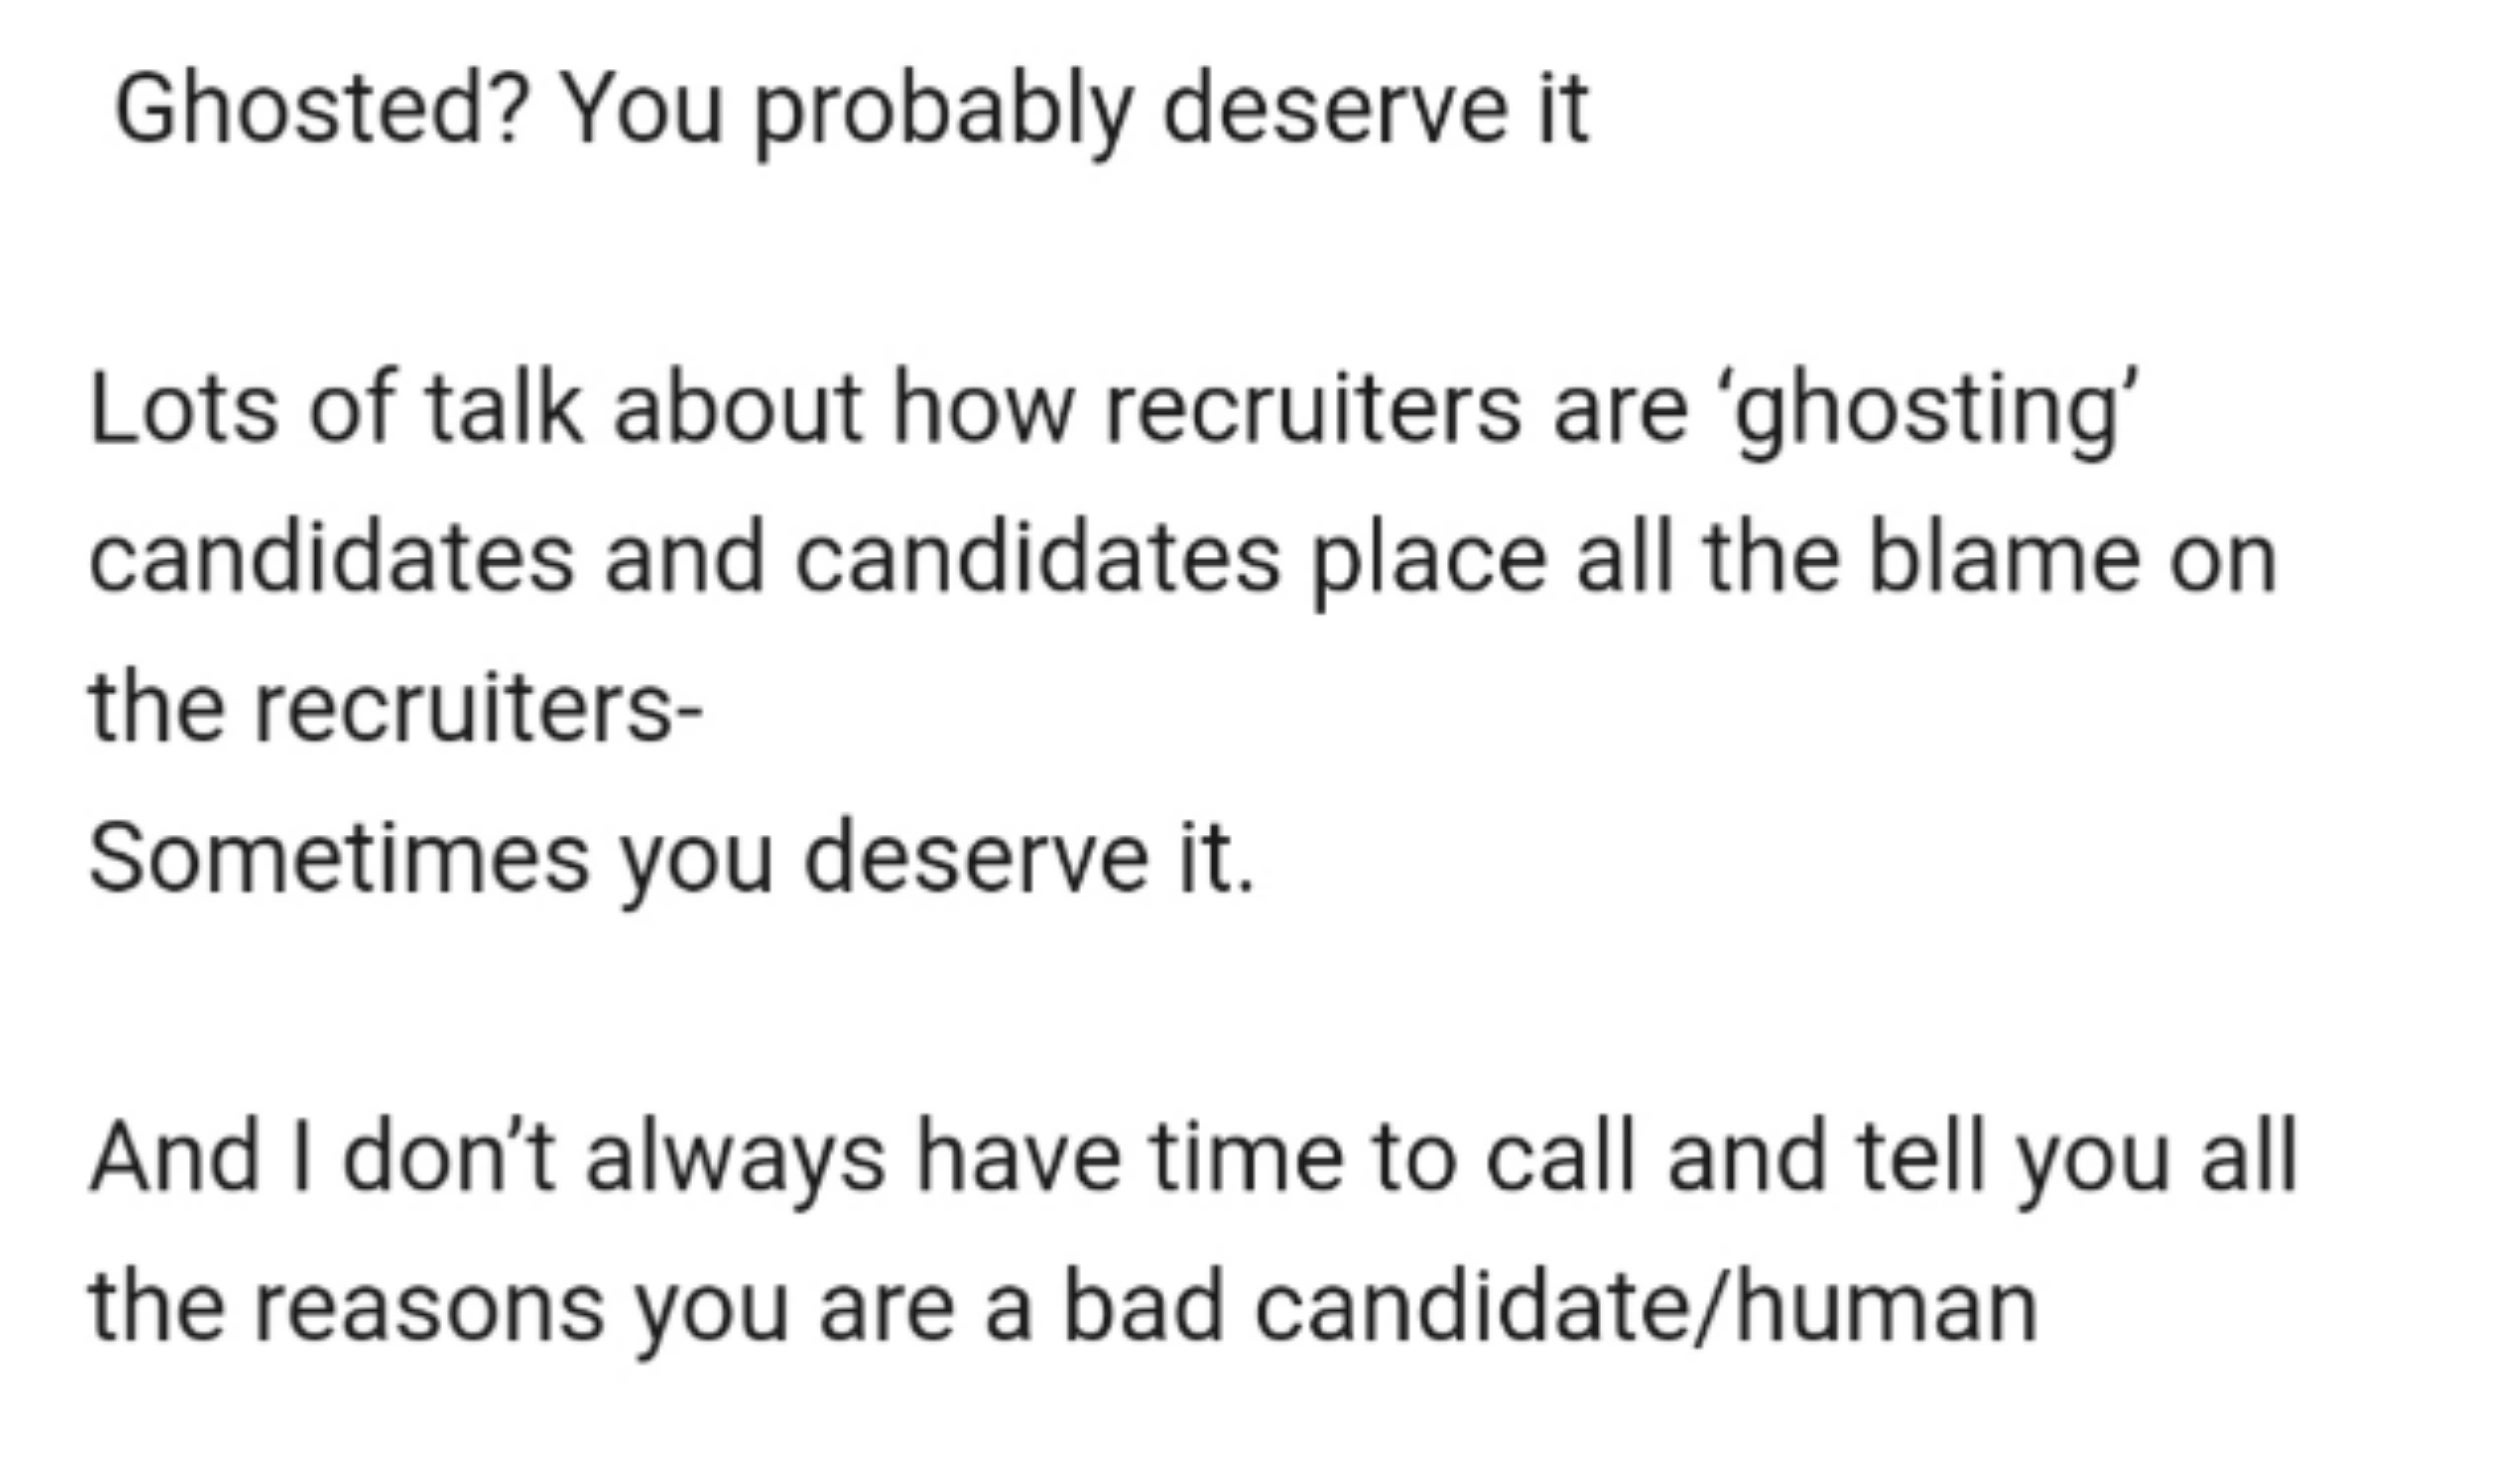 &quot;Ghosted? You probably deserve it&quot;